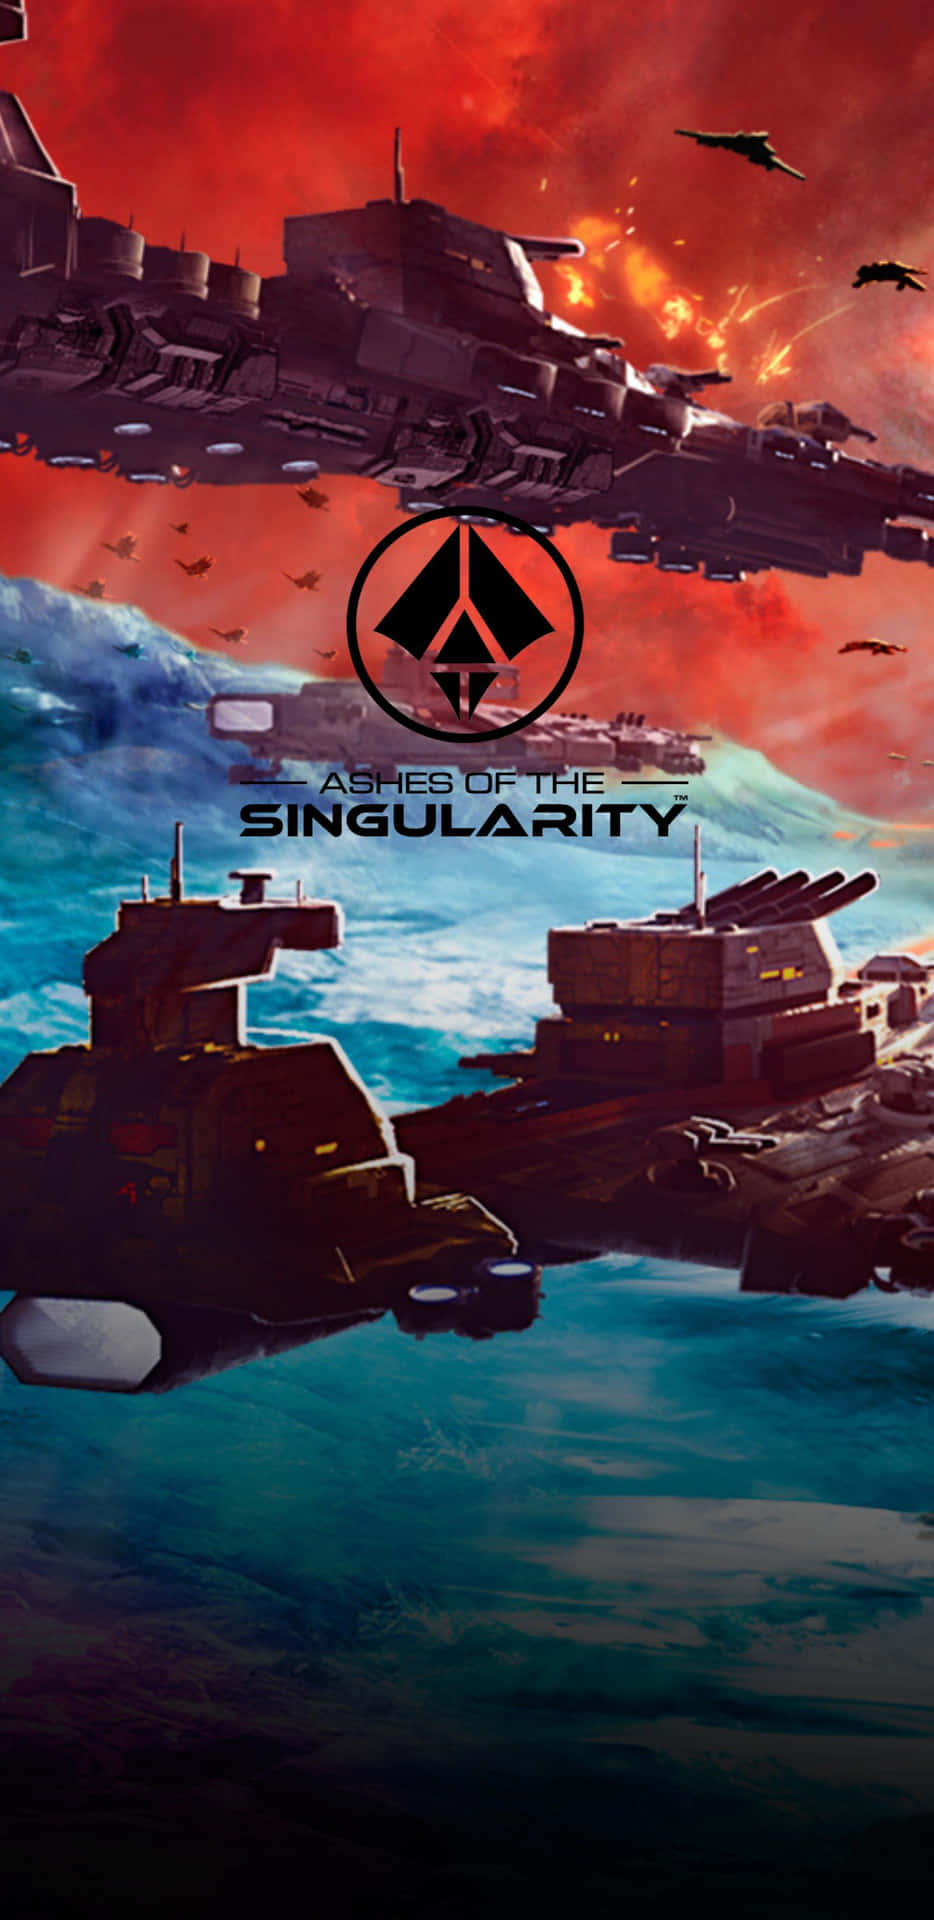 Play Ashes of the Singularity, An Epic New Strategy Game, On Pixel 3xl